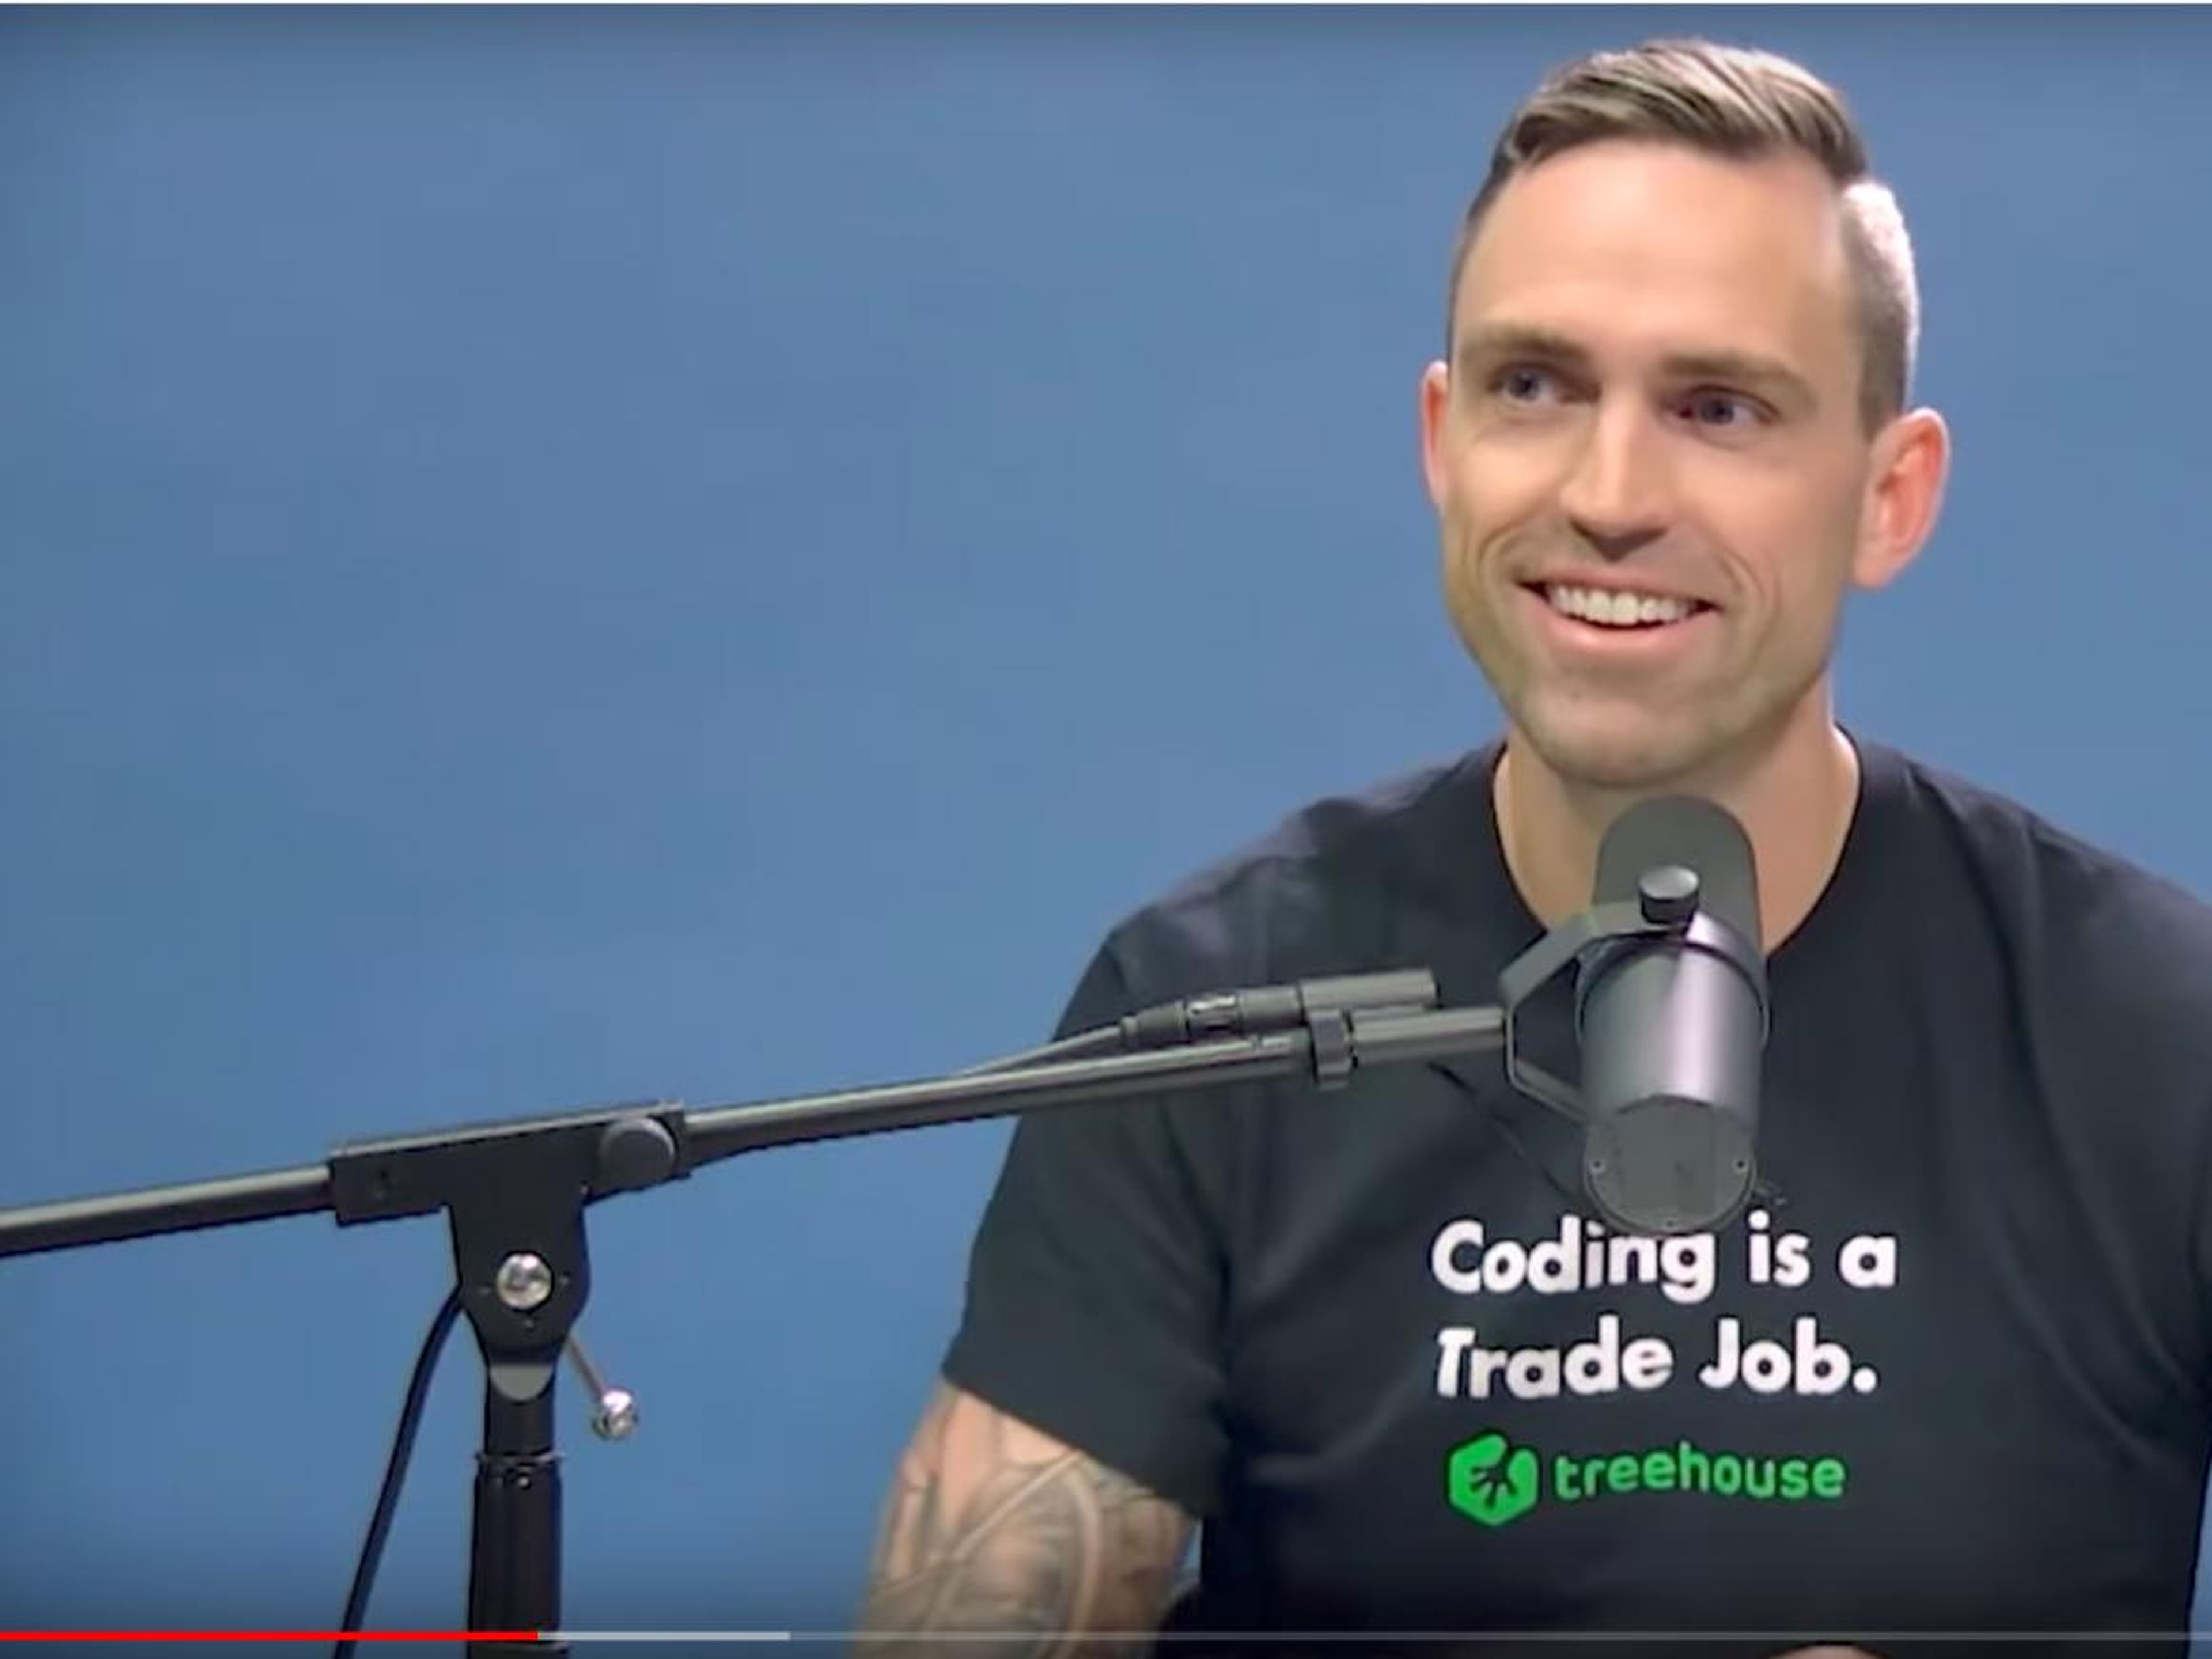 Treehouse CEO Ryan Carson initially allowed the online learning platform's employees to work 32-hour workweeks. But in 2016, after nearly 20% of Treehouse's employees were laid off, Carson implemented a five-day workweek.